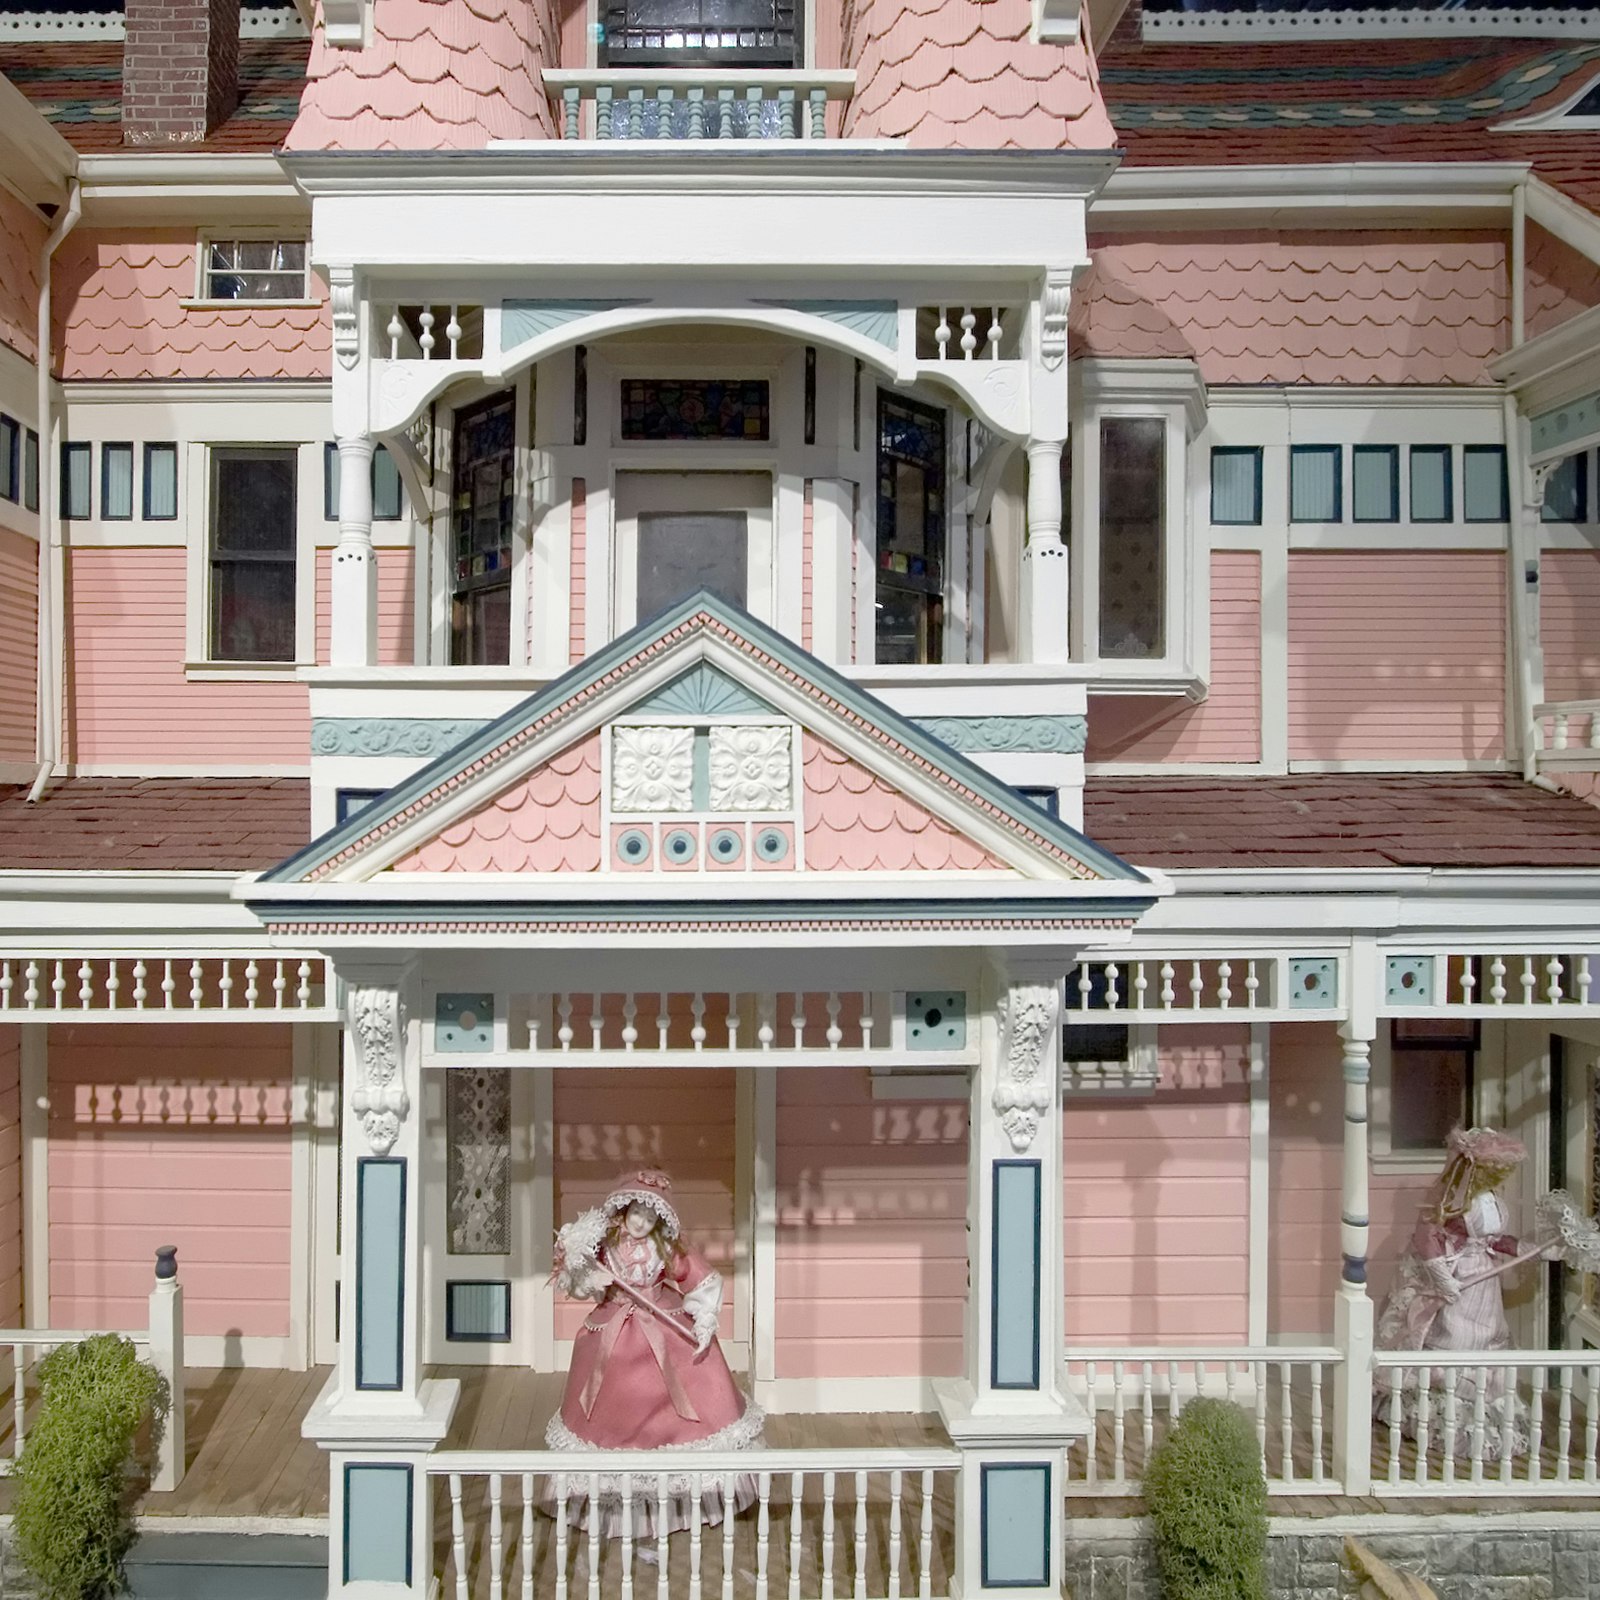 facade of a colonnial design dollhouse; Shutterstock ID 3436117; Your name (First / Last): Josh Vogel; GL account no.: 56530; Netsuite department name: Online Design; Full Product or Project name including edition: Digital Content/Sights